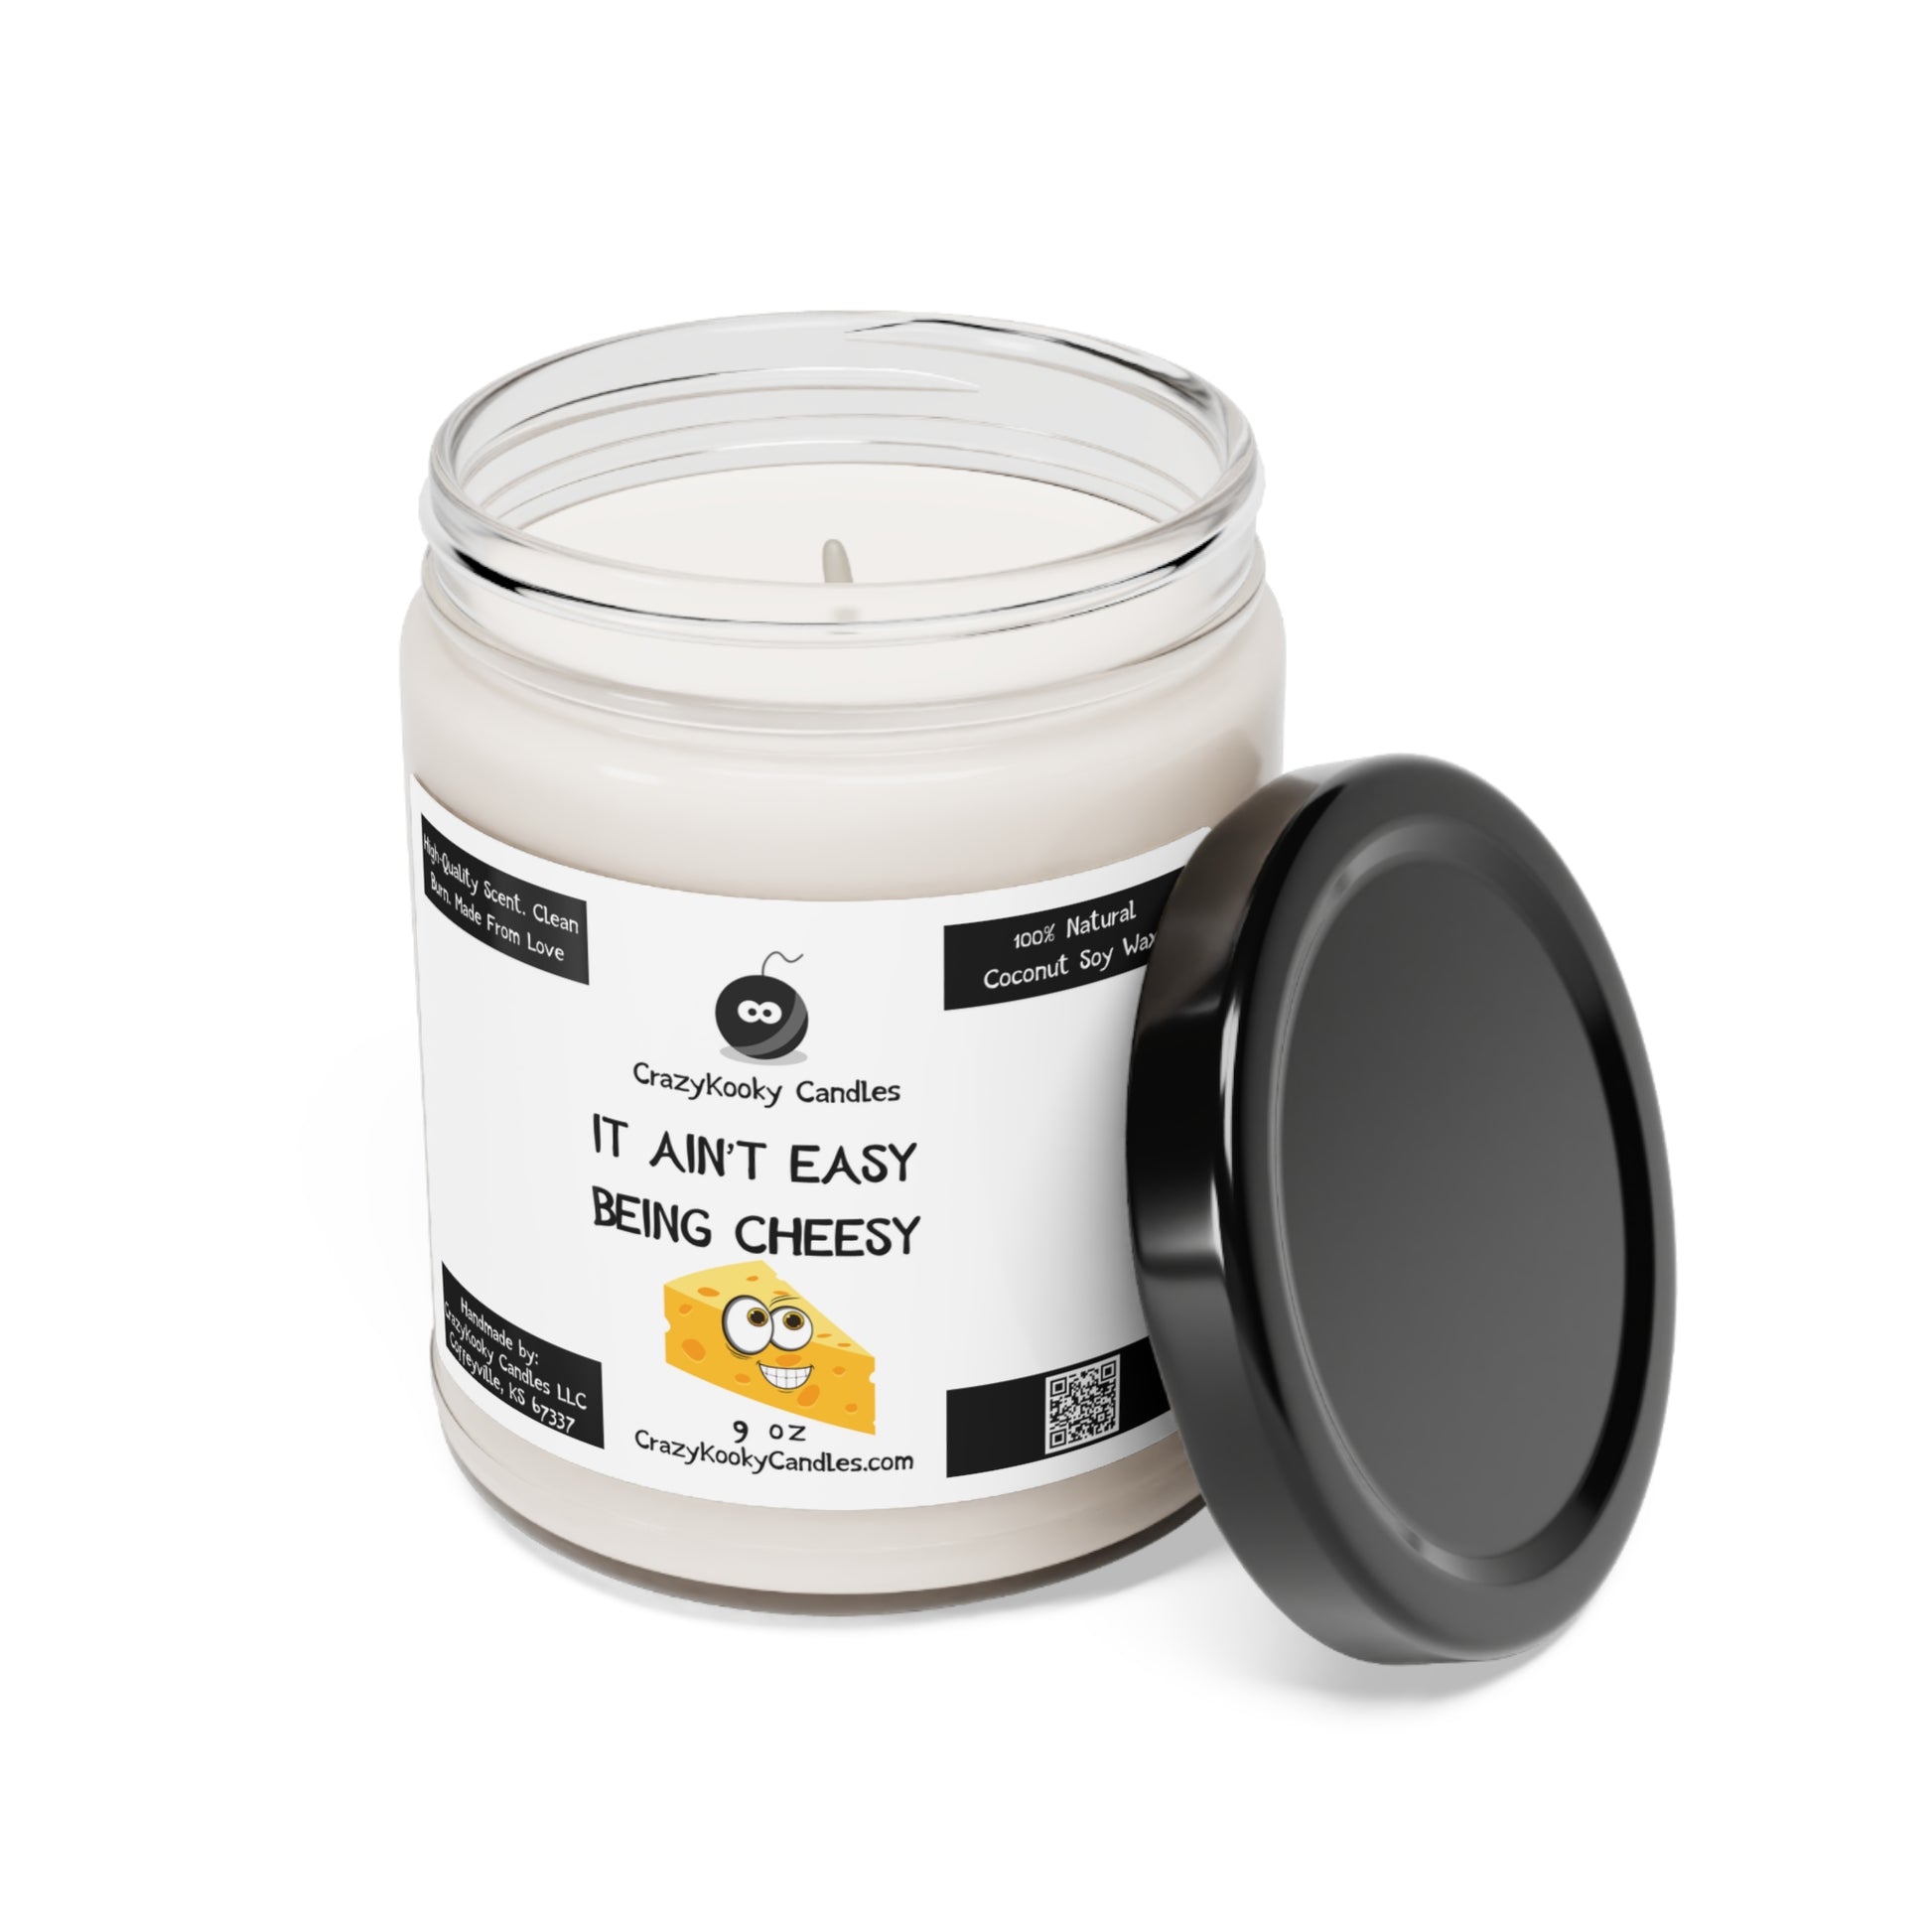 IT AIN'T EASY BEING CHEESY - Funny Candle, Scented Coconut Soy Candle, 9oz - CrazyKooky Candles LLC